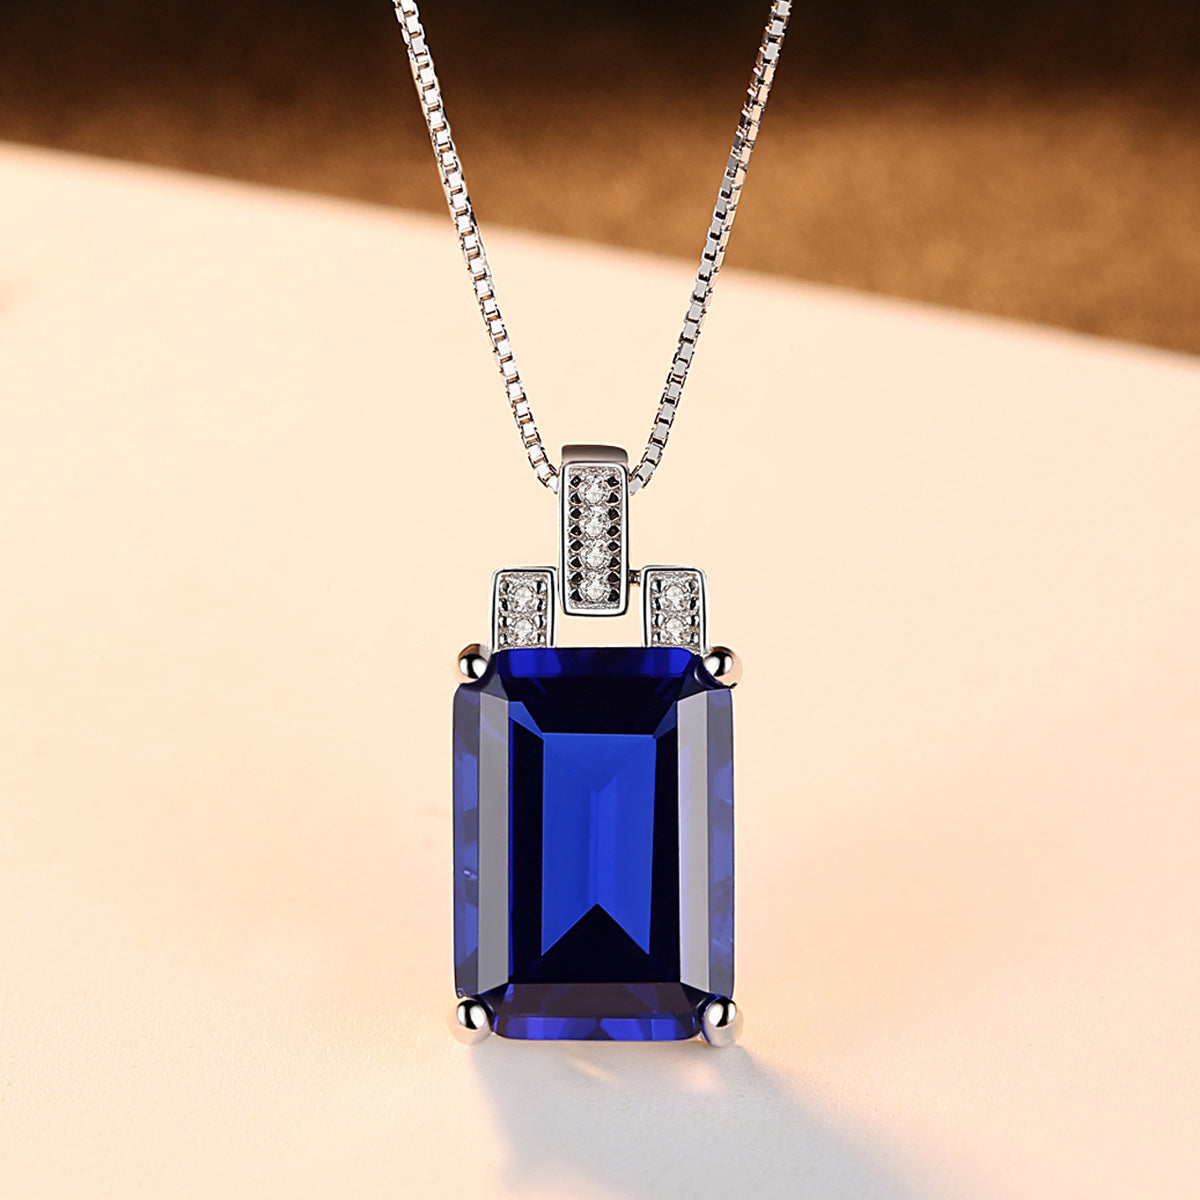 Gemstonely- Elegant and Sophisticated: 925 Silver Necklace with Simulated Gemstone Pendant and Micro Inlay for a Timeless Appeal